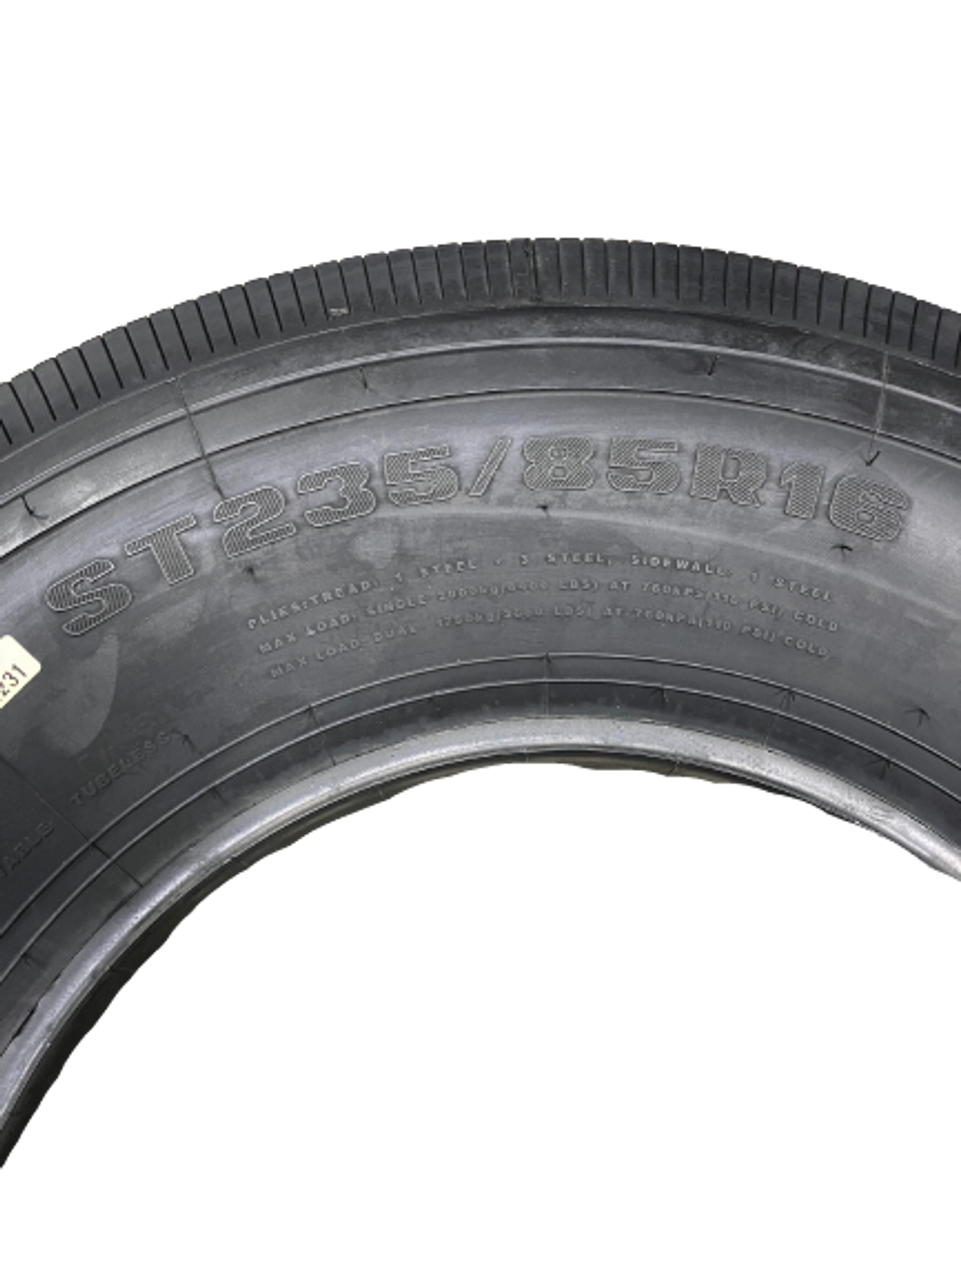 New Tire 235 85 16 - Gremax All-Steel Trailer Tires  -  ST235/85R16   14 PLY